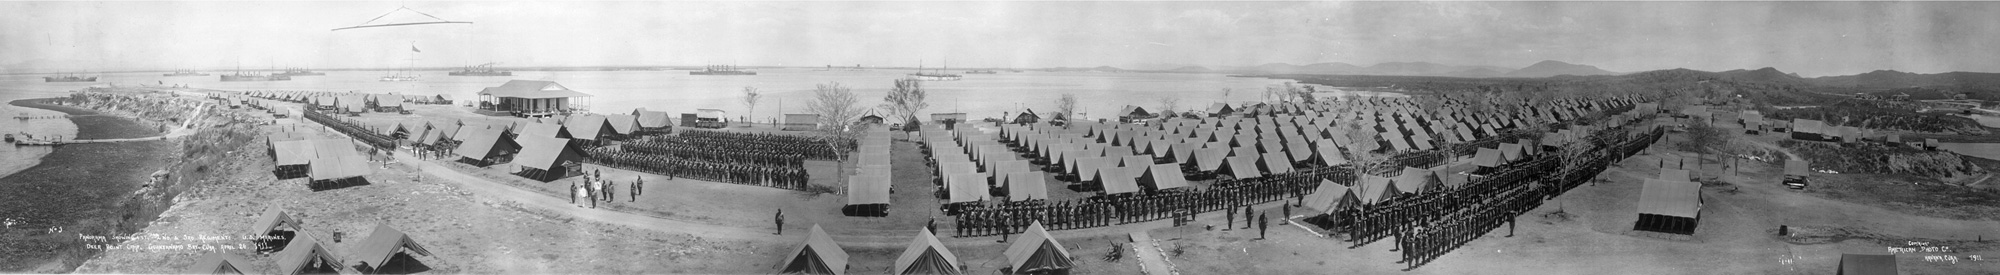 A nineteen eleven photograph of the United States Marines Camp at Guantánamo Bay.